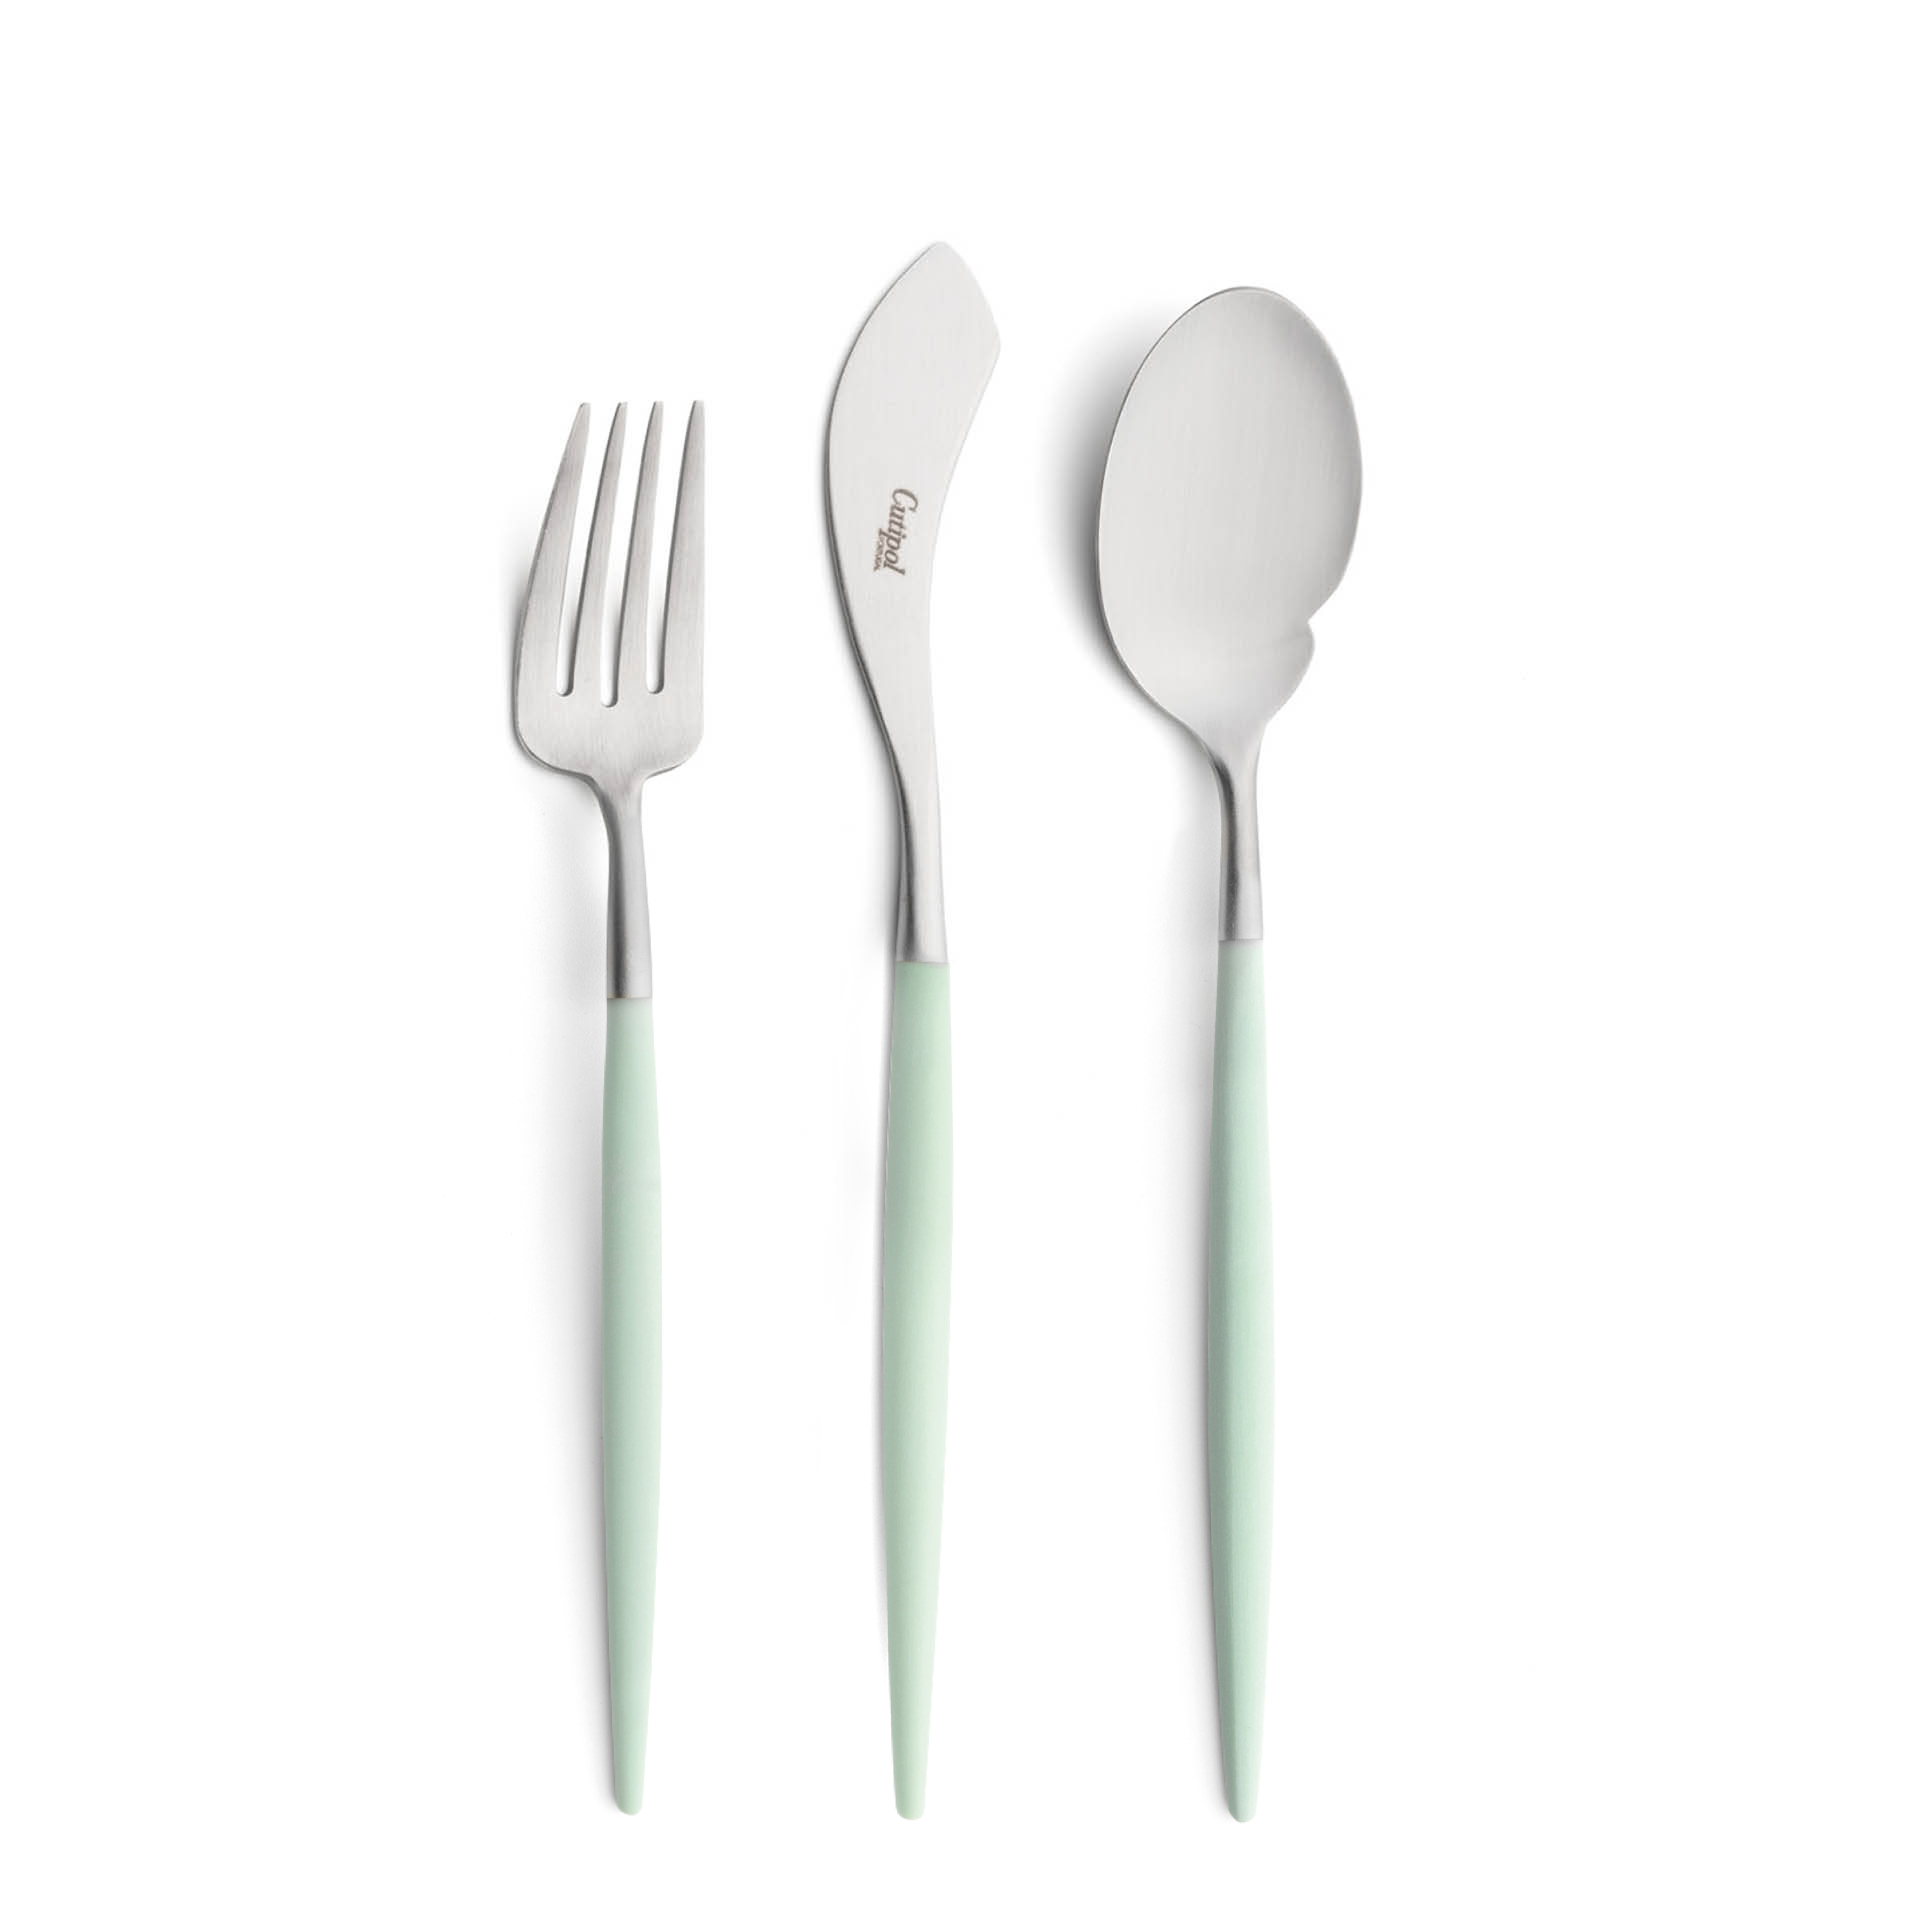 Cutipol Cutlery Goa Celadon with fish fork, fish knife and gourmet spoon